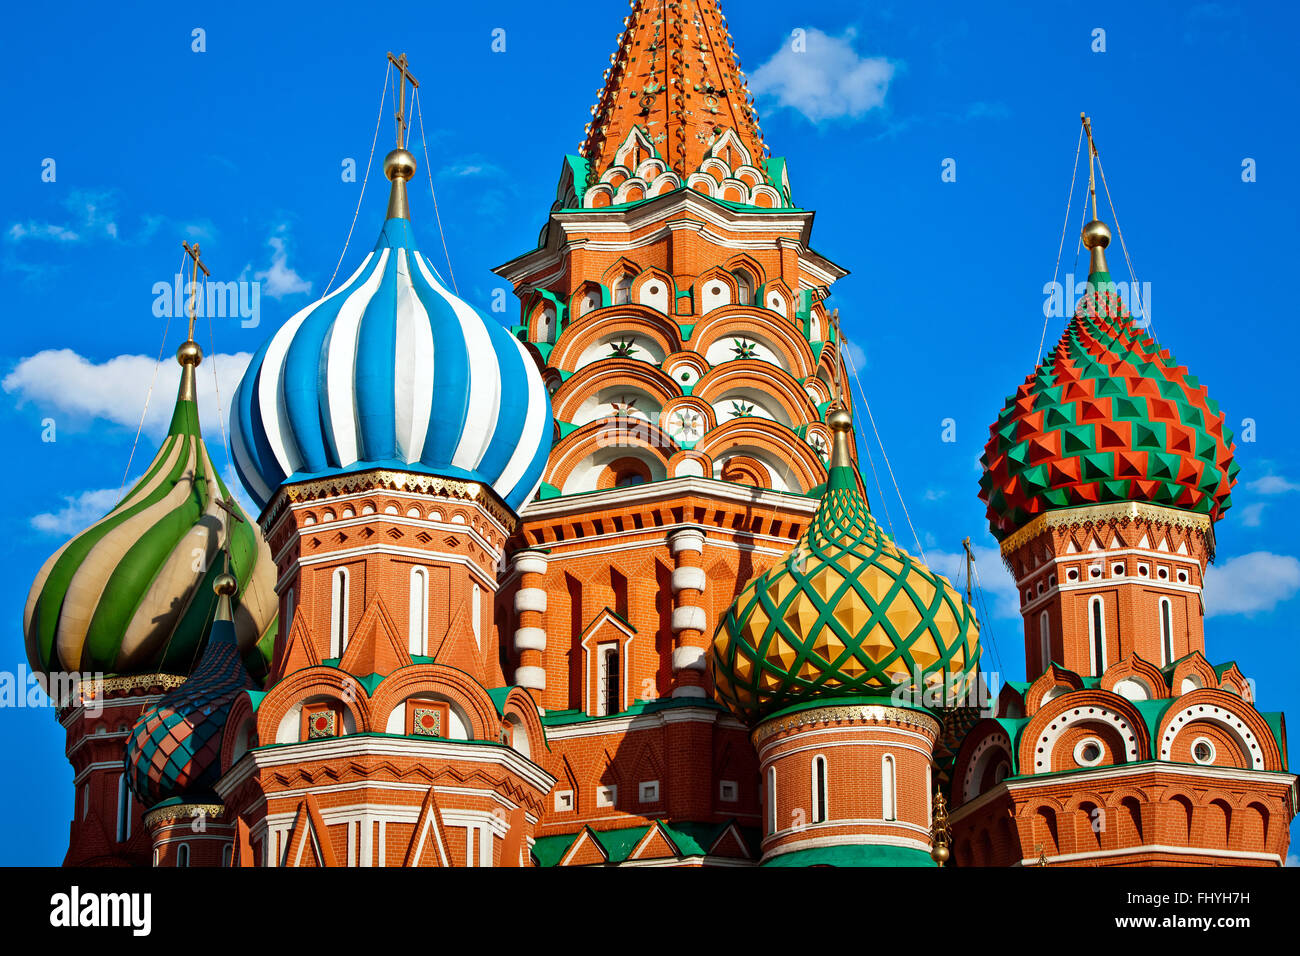 St. Basil's Cathedral in Moscow, Russia Stock Photo